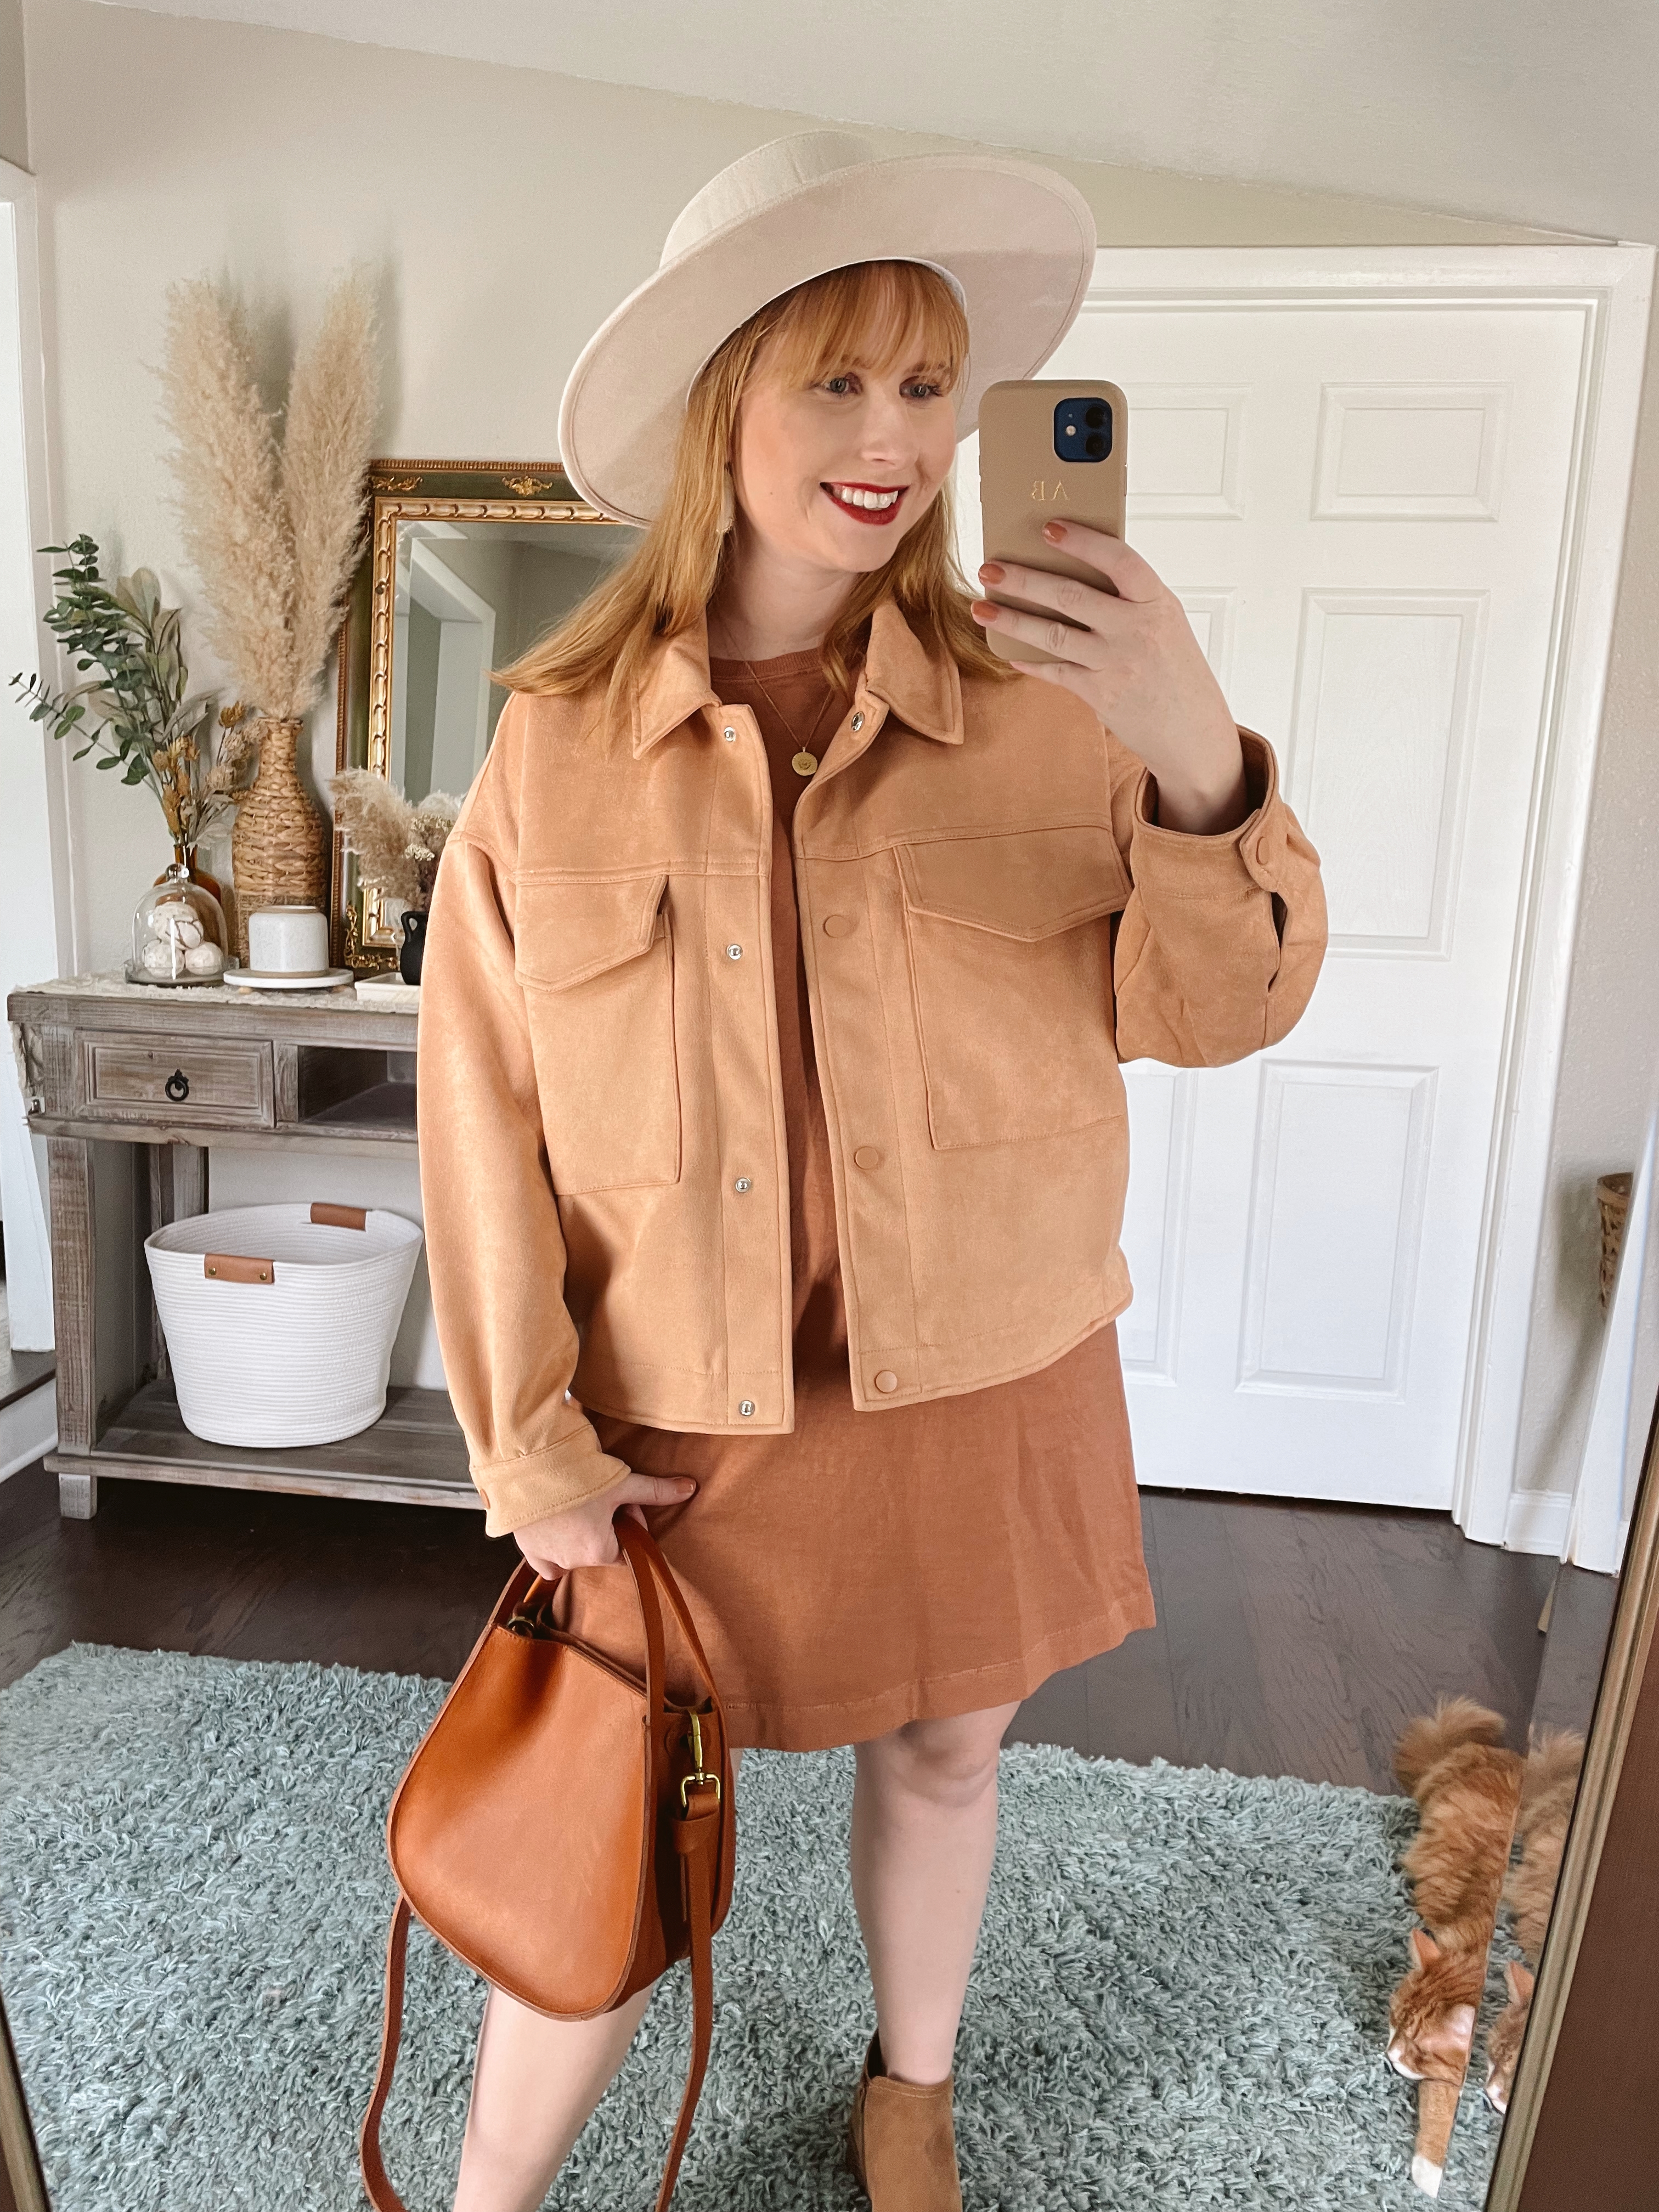 Scoop Women's Oversized Cropped Faux Suede Jacket - Loose Vintage Garment-Dyed T-Shirt Shift Dress - 4 Fall Looks from Old Navy